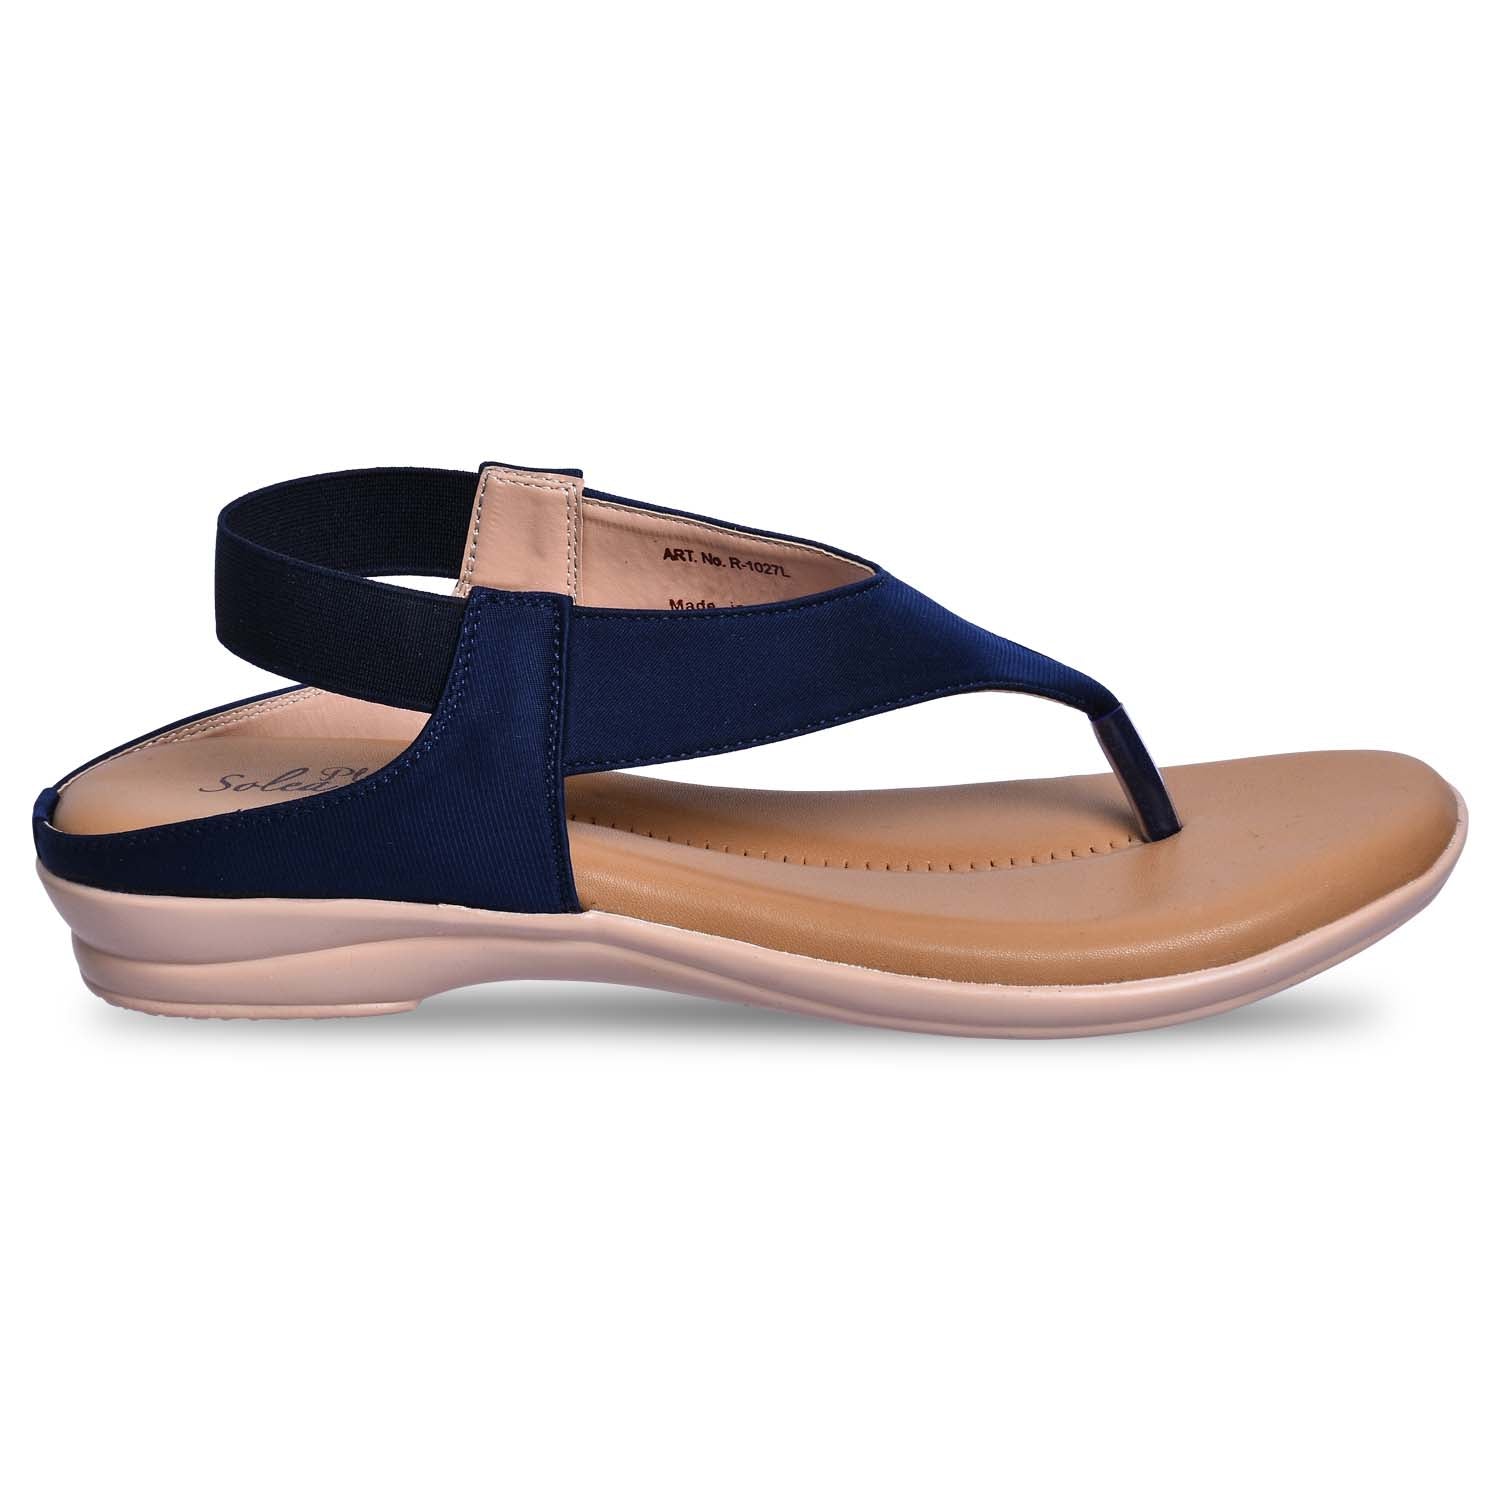 Paragon R1027L Women Sandals | Casual &amp; Formal Sandals | Stylish, Comfortable &amp; Durable | For Daily &amp; Occasion Wear